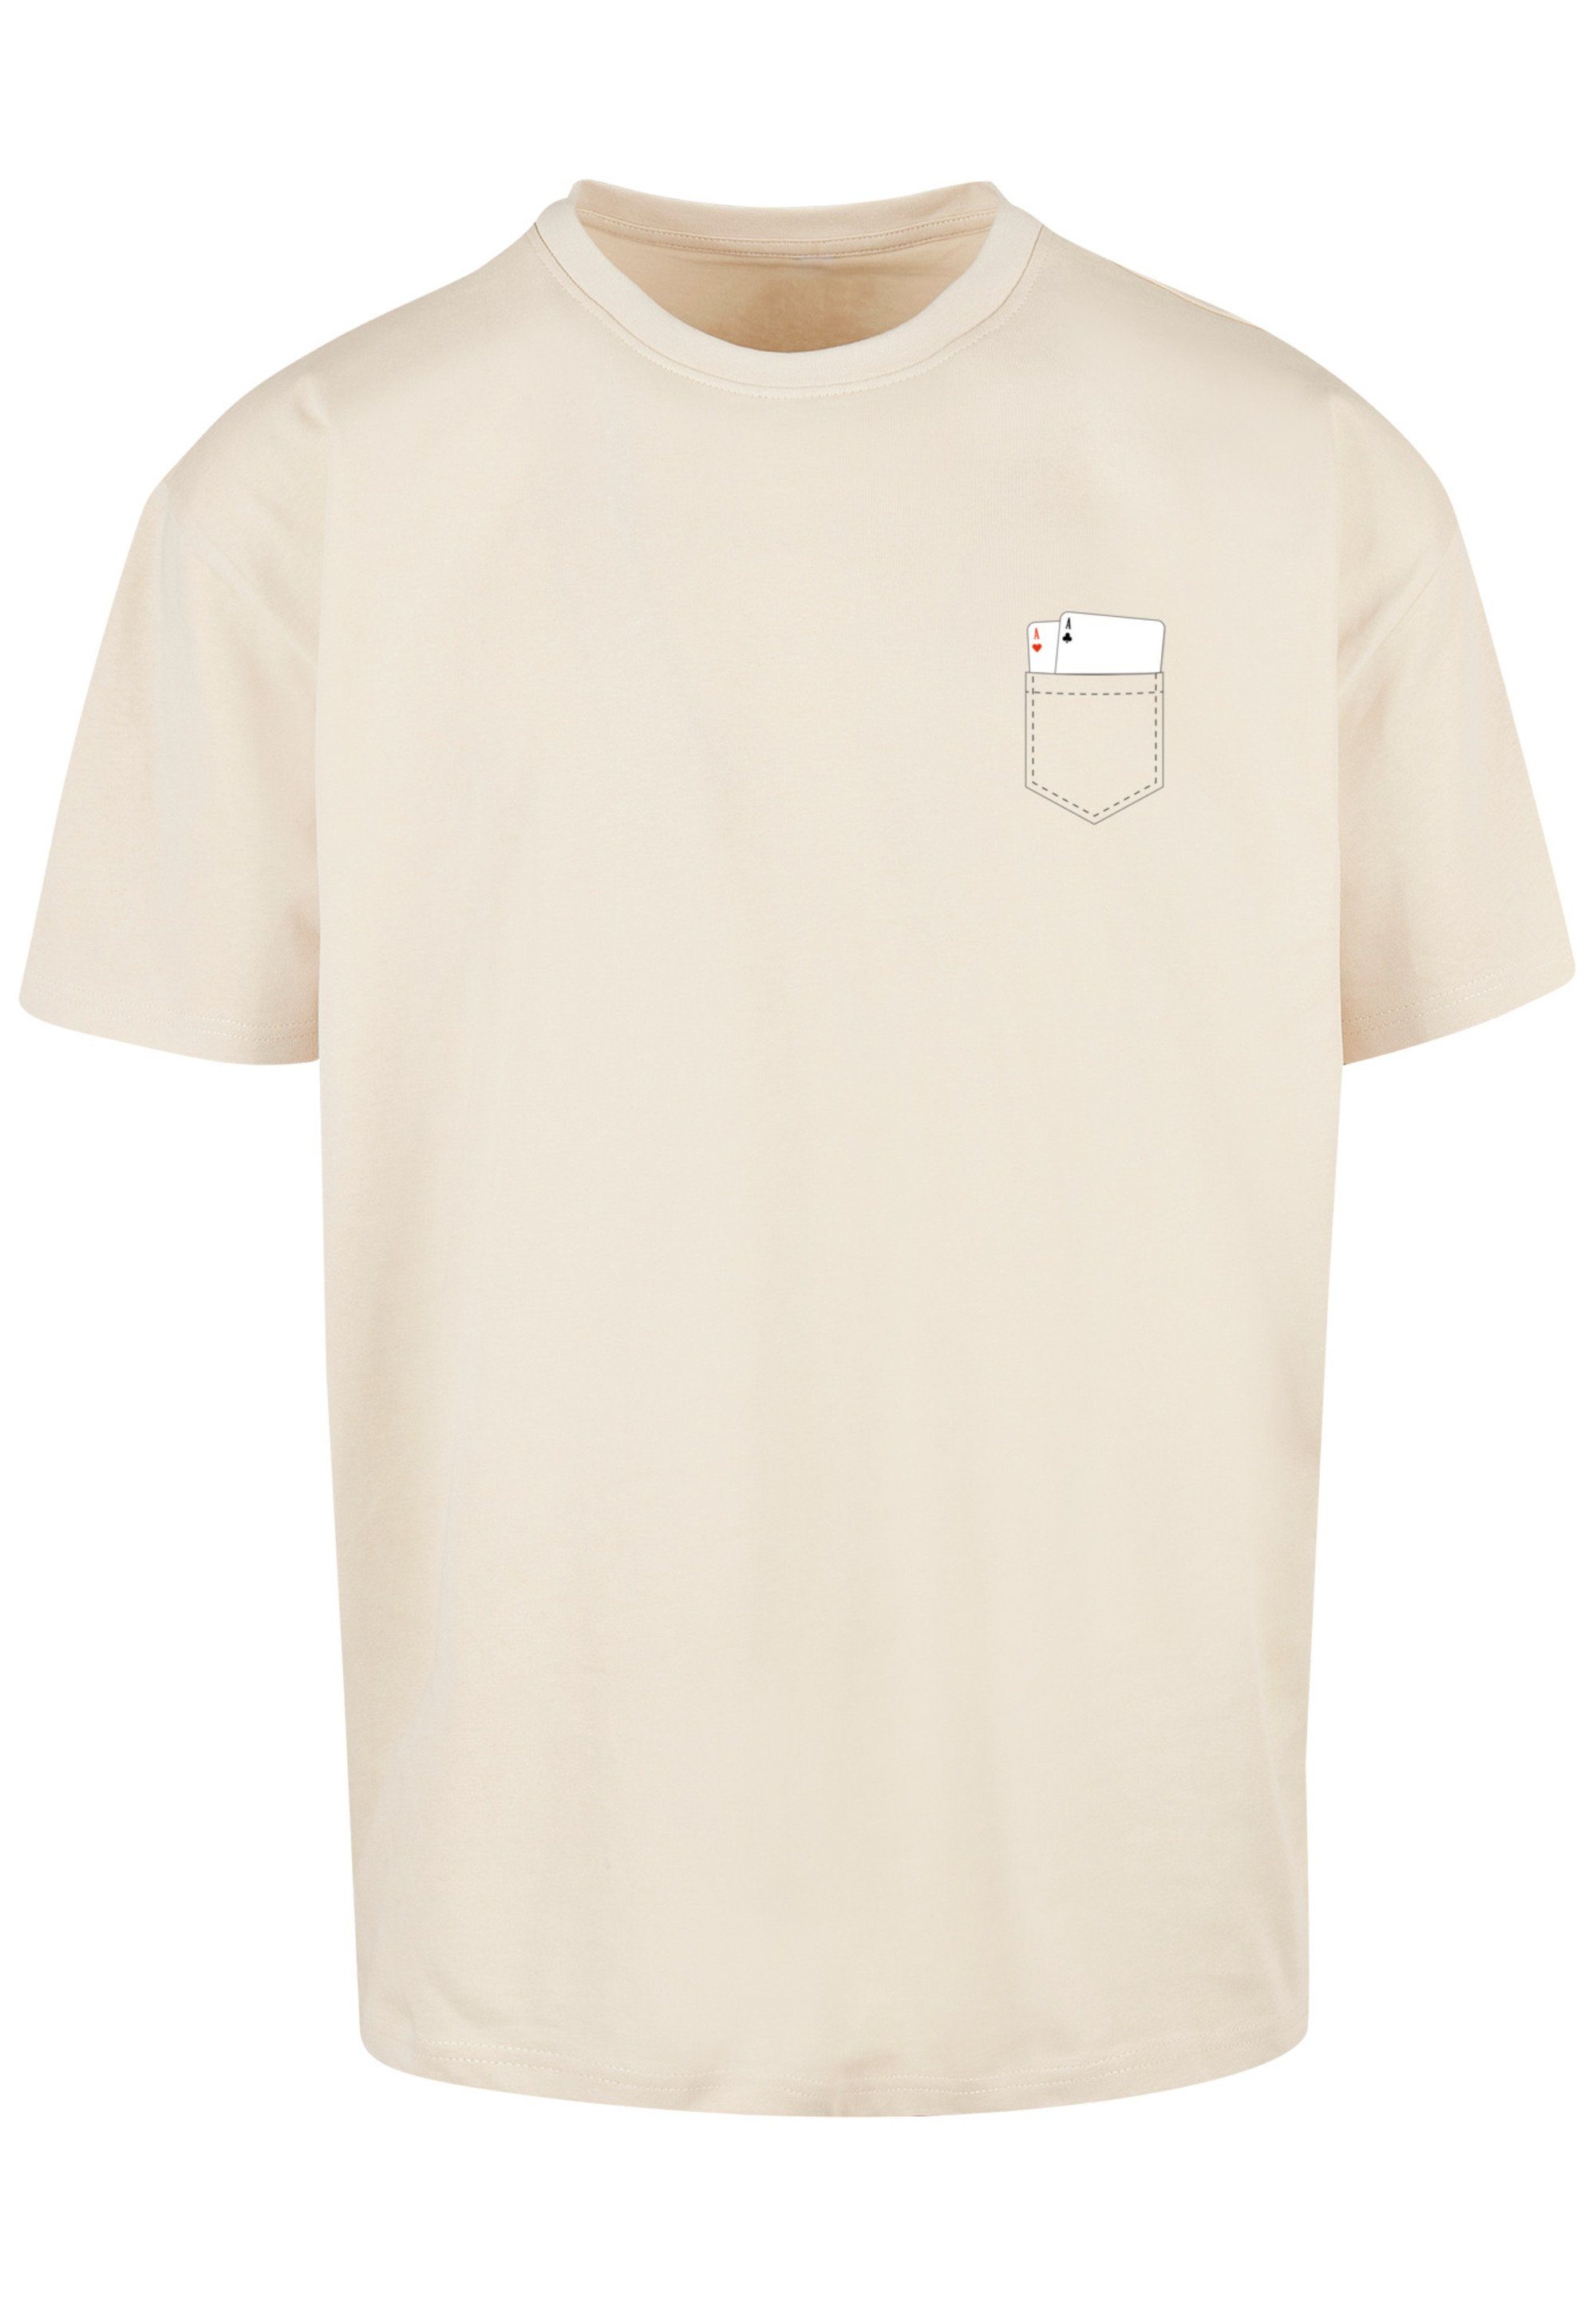 Pocket Print Cards T-Shirt with F4NT4STIC sand